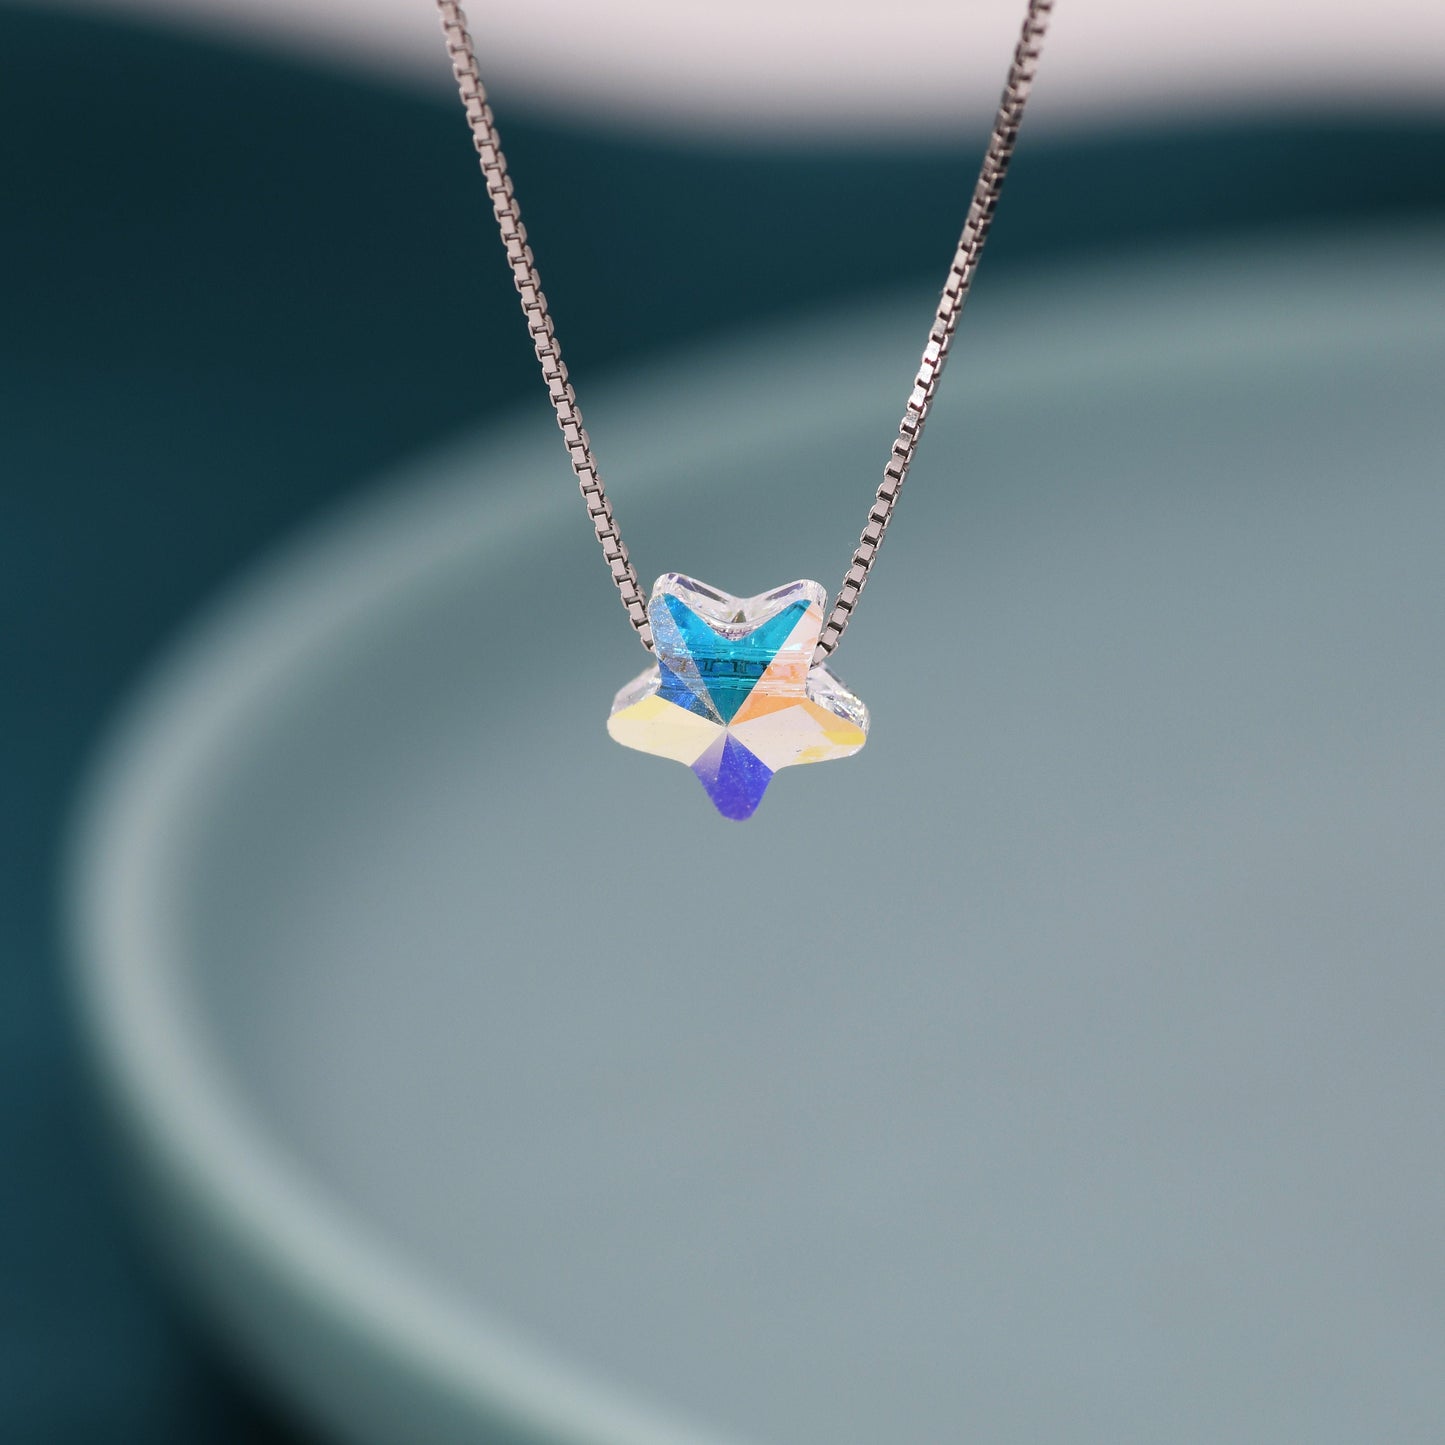 AB Crystal Star Pendant Necklace in Sterling Silver,  Colour Changing Aurora Crystal Necklace, Aurora Crystal, AB Crystal